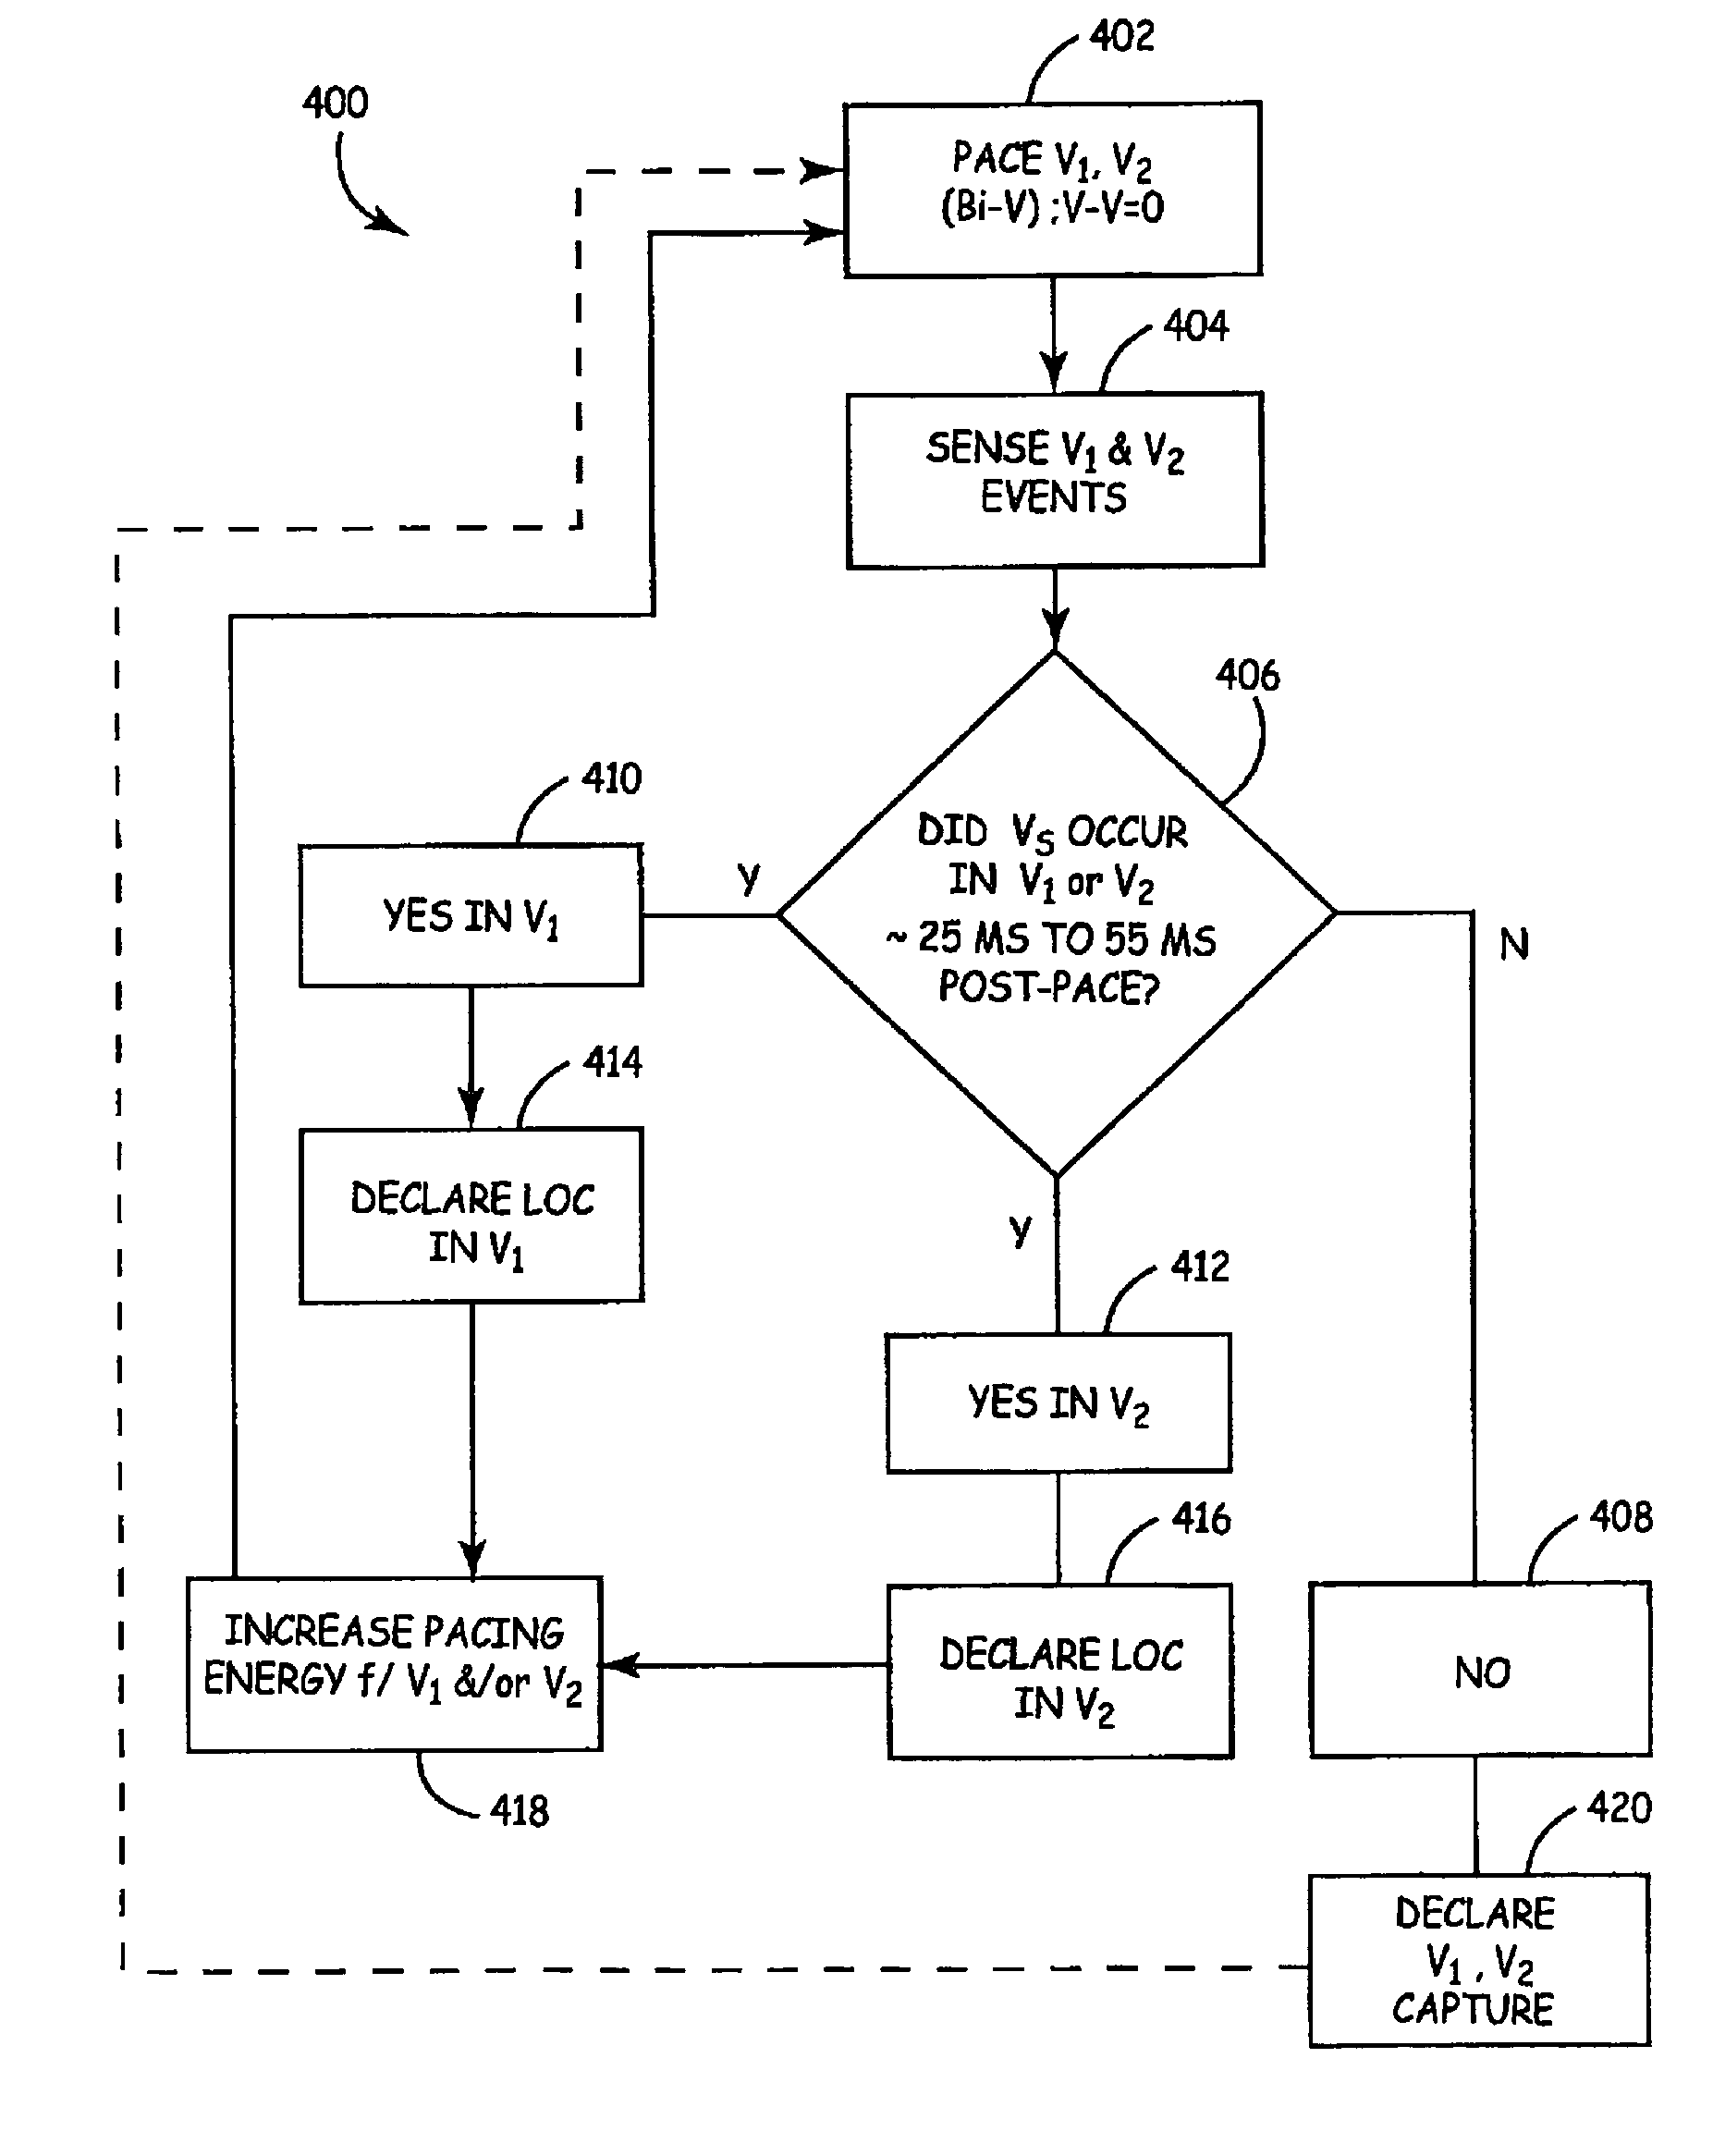 Method of continuous capture verification in cardiac resynchronization devices